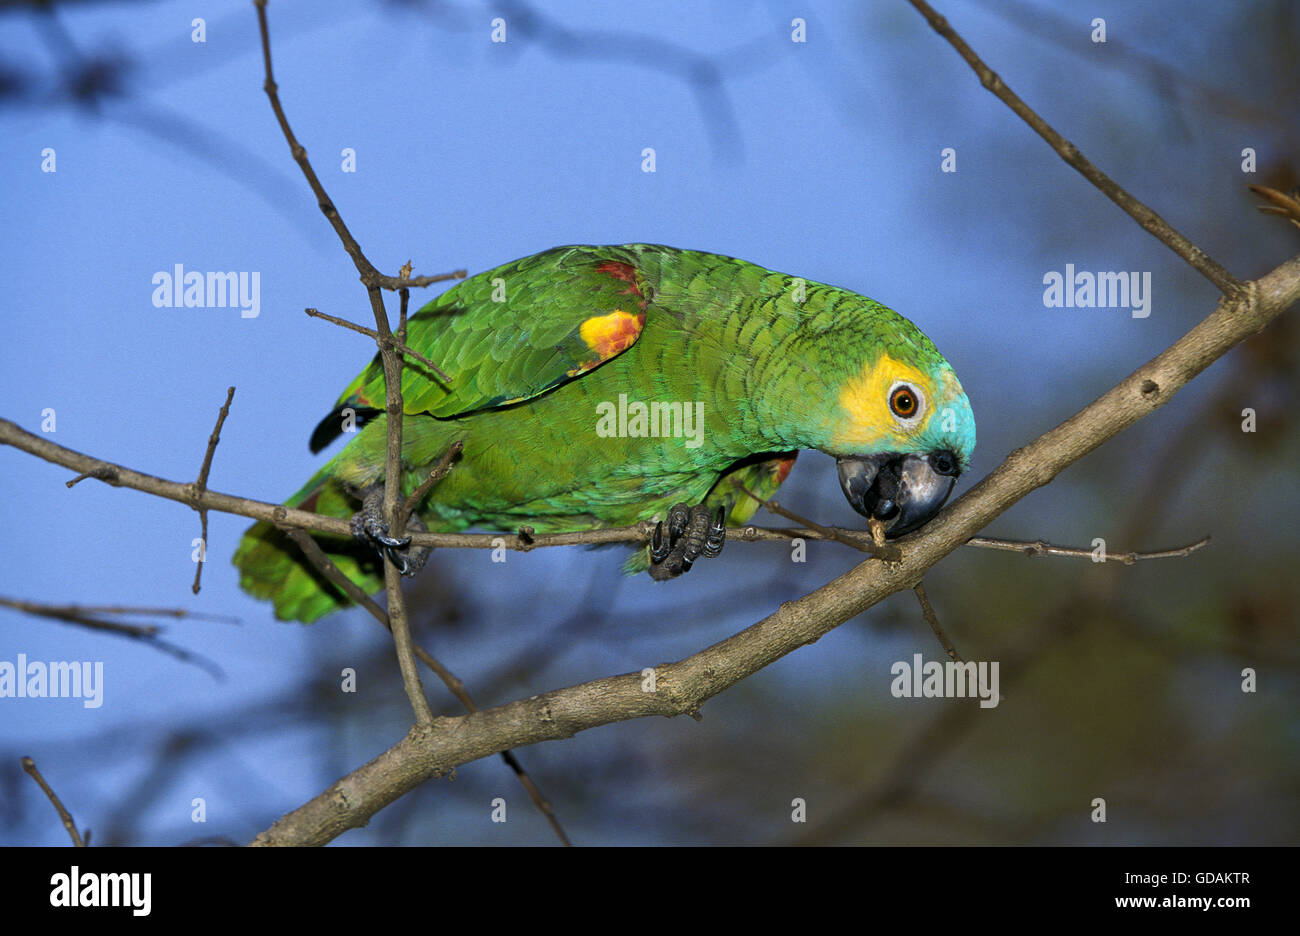 Blue-Fronted Amazon Parrot or Turquoise-Fronted Amazon Parrot, amazona aestiva, Adult on Branch, Pantanal in Brazil Stock Photo